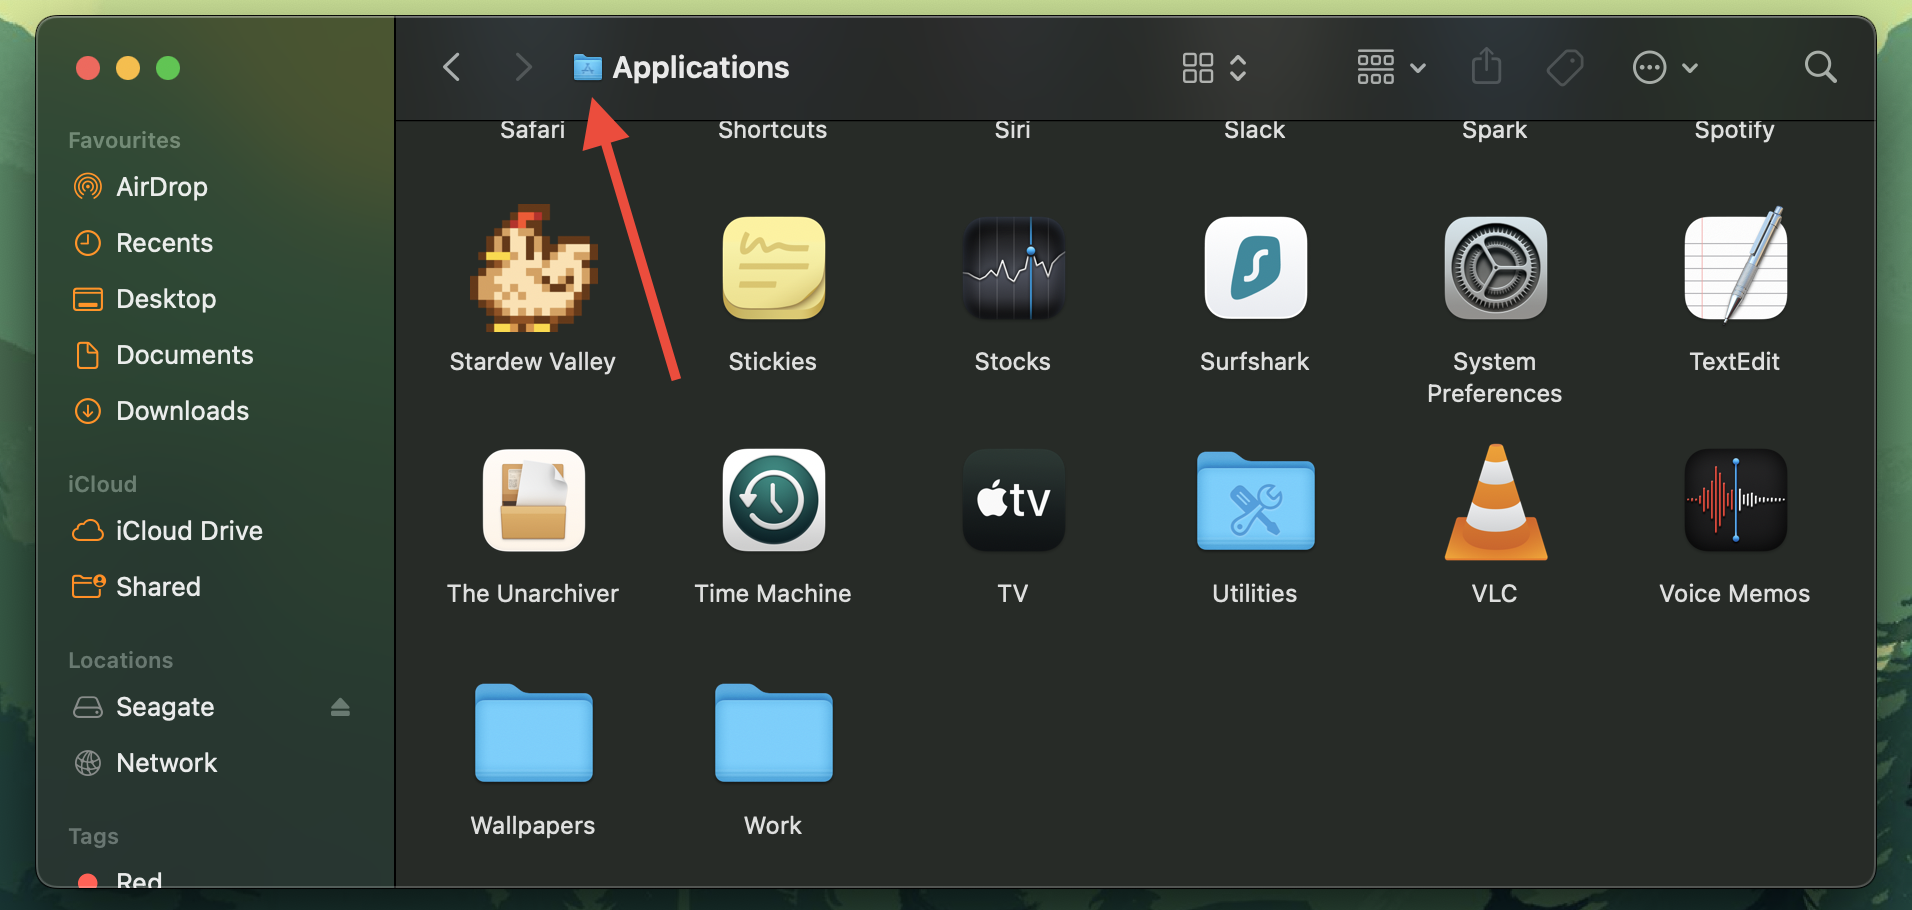 Hoovering the cursor near “Applications”